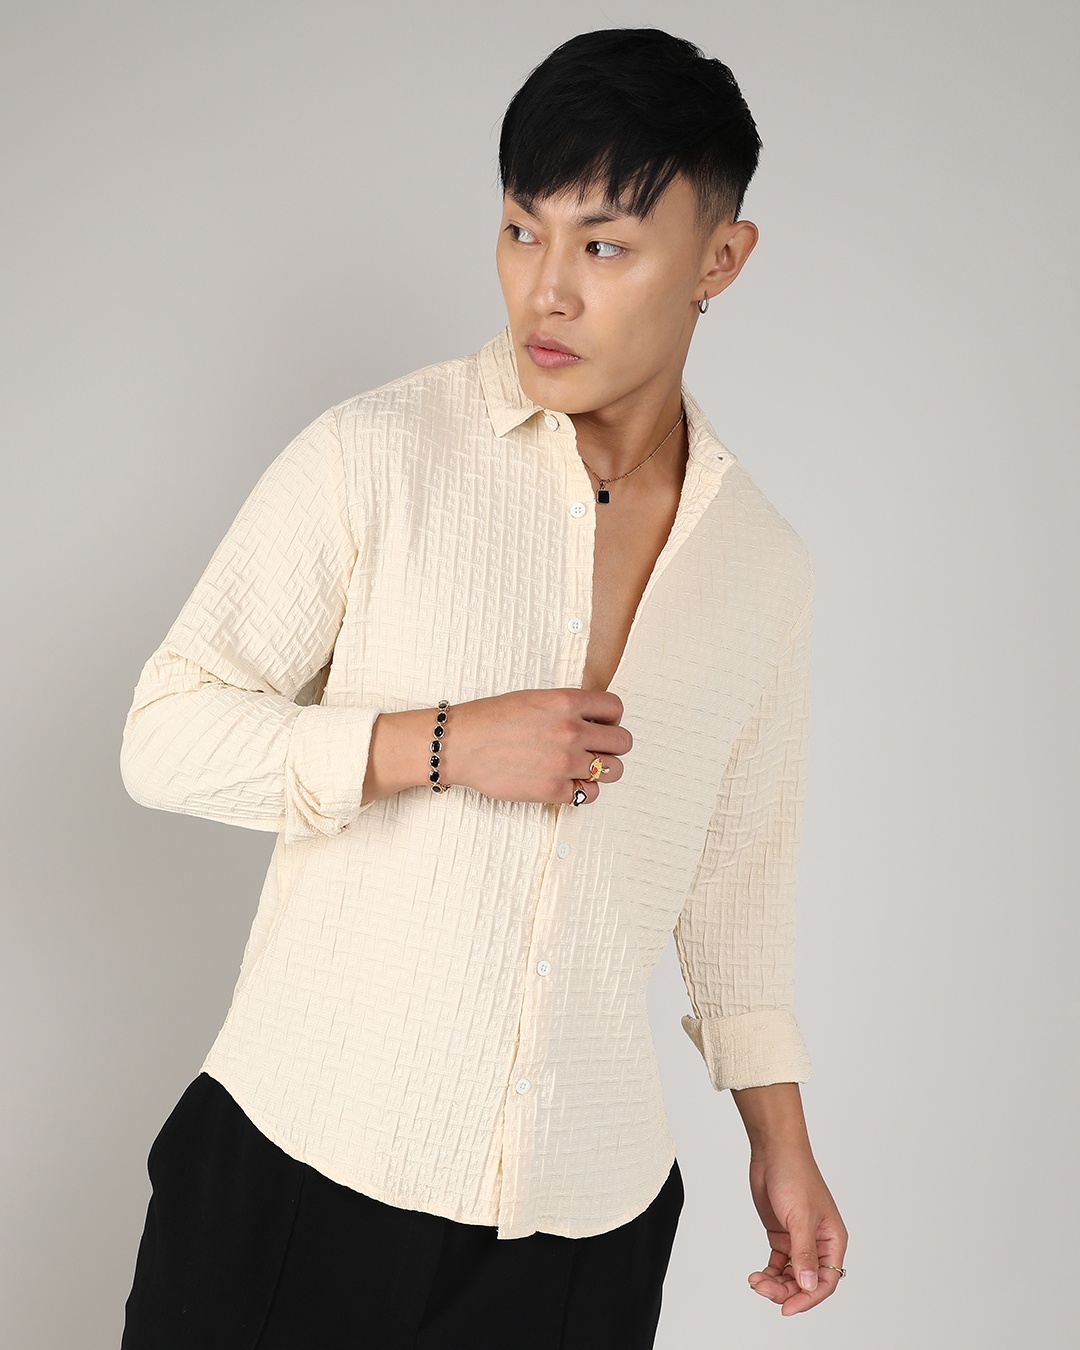 Men's Pale Yellow Textured Relaxed Fit Shirt